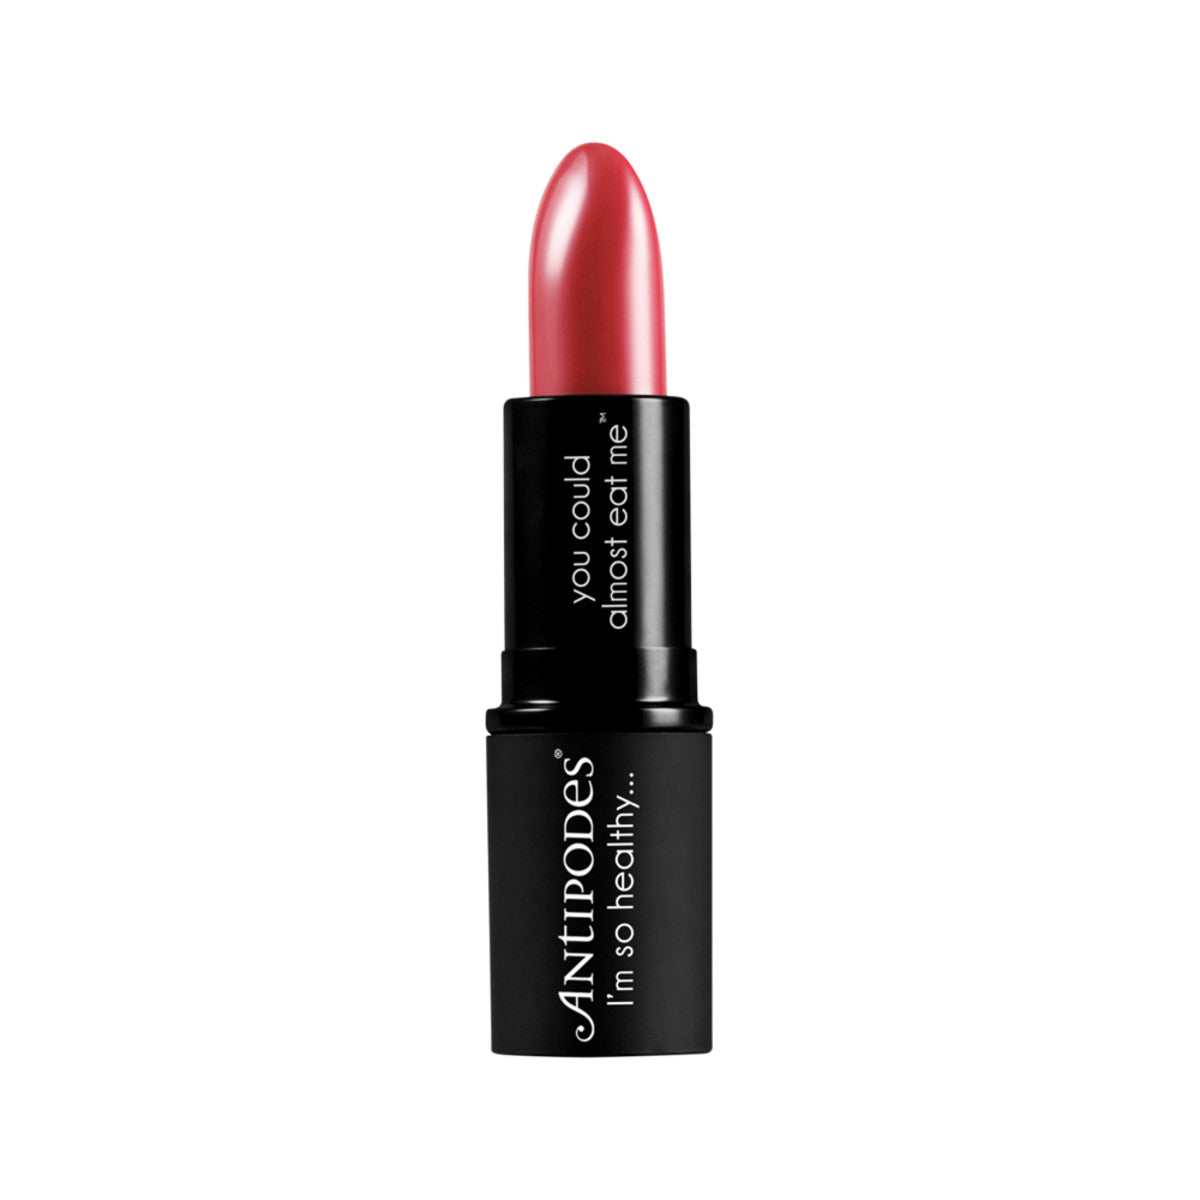 Antipodes Remarkably Red Moisture-Boost Natural Lipstick 4g-The Living Co.